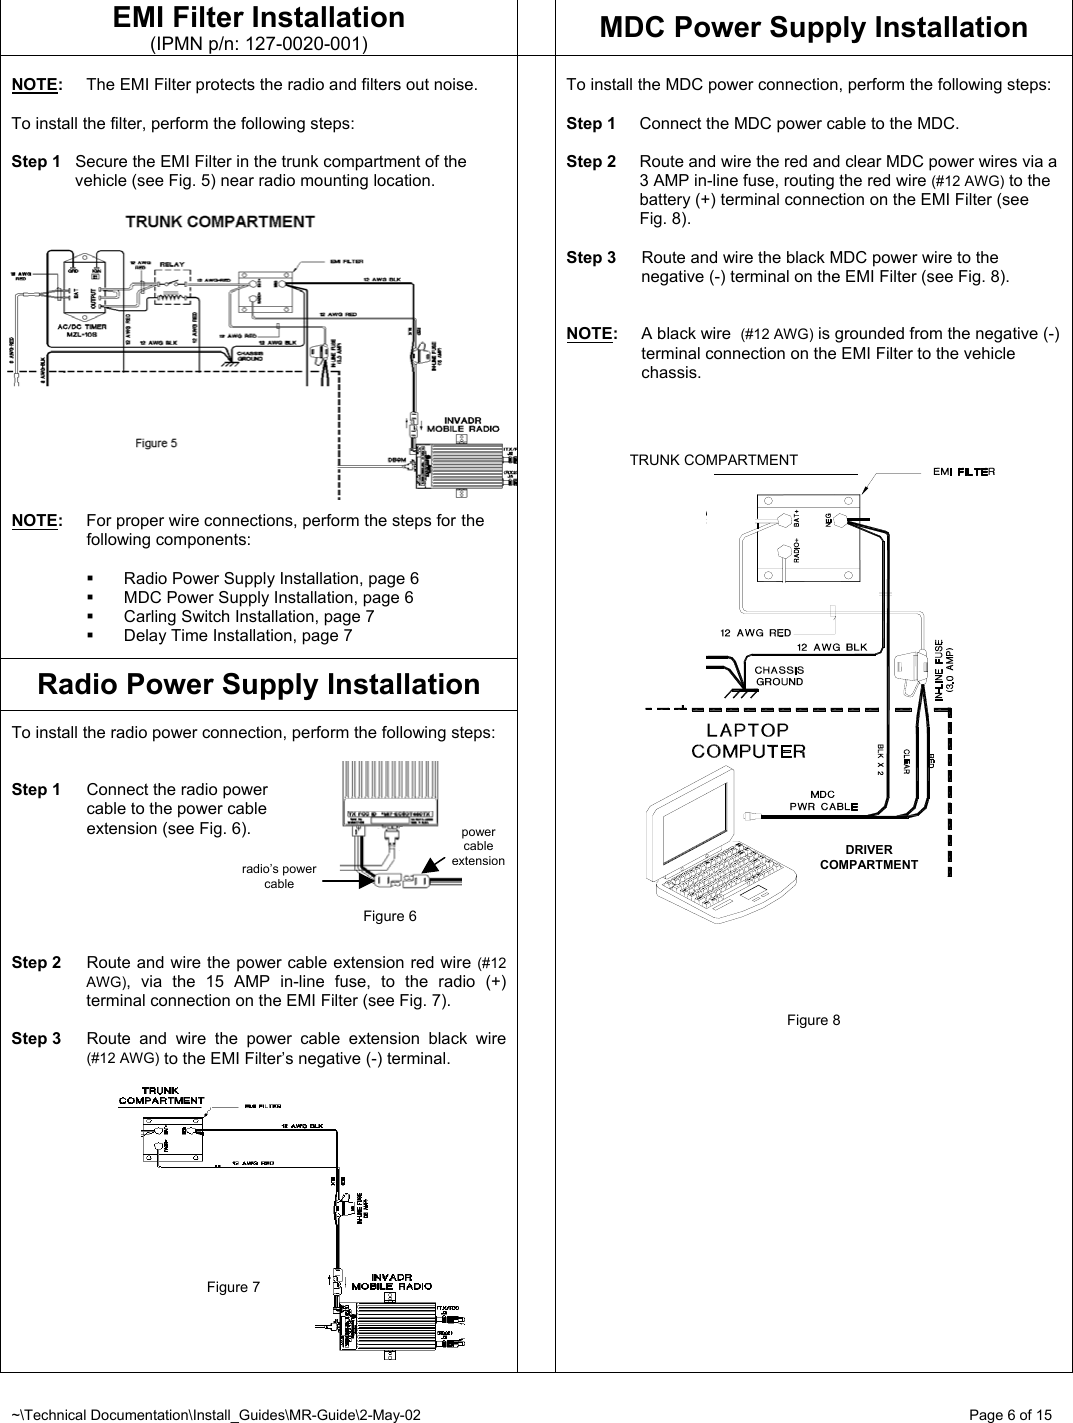 ~\Technical Documentation\Install_Guides\MR-Guide\2-May-02   Page 6 of 15 DRIVER COMPARTMENT TRUNK COMPARTMENT EMI Filter Installation (IPMN p/n: 127-0020-001)  MDC Power Supply Installation  NOTE:  The EMI Filter protects the radio and filters out noise.  To install the filter, perform the following steps:  Step 1  Secure the EMI Filter in the trunk compartment of the vehicle (see Fig. 5) near radio mounting location.   NOTE:  For proper wire connections, perform the steps for  the  following components:    Radio Power Supply Installation, page 6   MDC Power Supply Installation, page 6   Carling Switch Installation, page 7   Delay Time Installation, page 7  Radio Power Supply Installation  To install the radio power connection, perform the following steps:   Step 1  Connect the radio power   cable to the power cable    extension (see Fig. 6).       Step 2  Route and wire the power cable extension red wire (#12 AWG), via the 15 AMP in-line fuse, to the radio (+) terminal connection on the EMI Filter (see Fig. 7).  Step 3  Route and wire the power cable extension black wire (#12 AWG) to the EMI Filter’s negative (-) terminal.                                           Figure 7       To install the MDC power connection, perform the following steps:  Step 1  Connect the MDC power cable to the MDC.  Step 2  Route and wire the red and clear MDC power wires via a 3 AMP in-line fuse, routing the red wire (#12 AWG) to the battery (+) terminal connection on the EMI Filter (see Fig. 8).  Step 3  Route and wire the black MDC power wire to the negative (-) terminal on the EMI Filter (see Fig. 8).   NOTE:  A black wire  (#12 AWG) is grounded from the negative (-) terminal connection on the EMI Filter to the vehicle chassis.                                   Figure 8           radio’s power cable power cable extensionFigure 6 